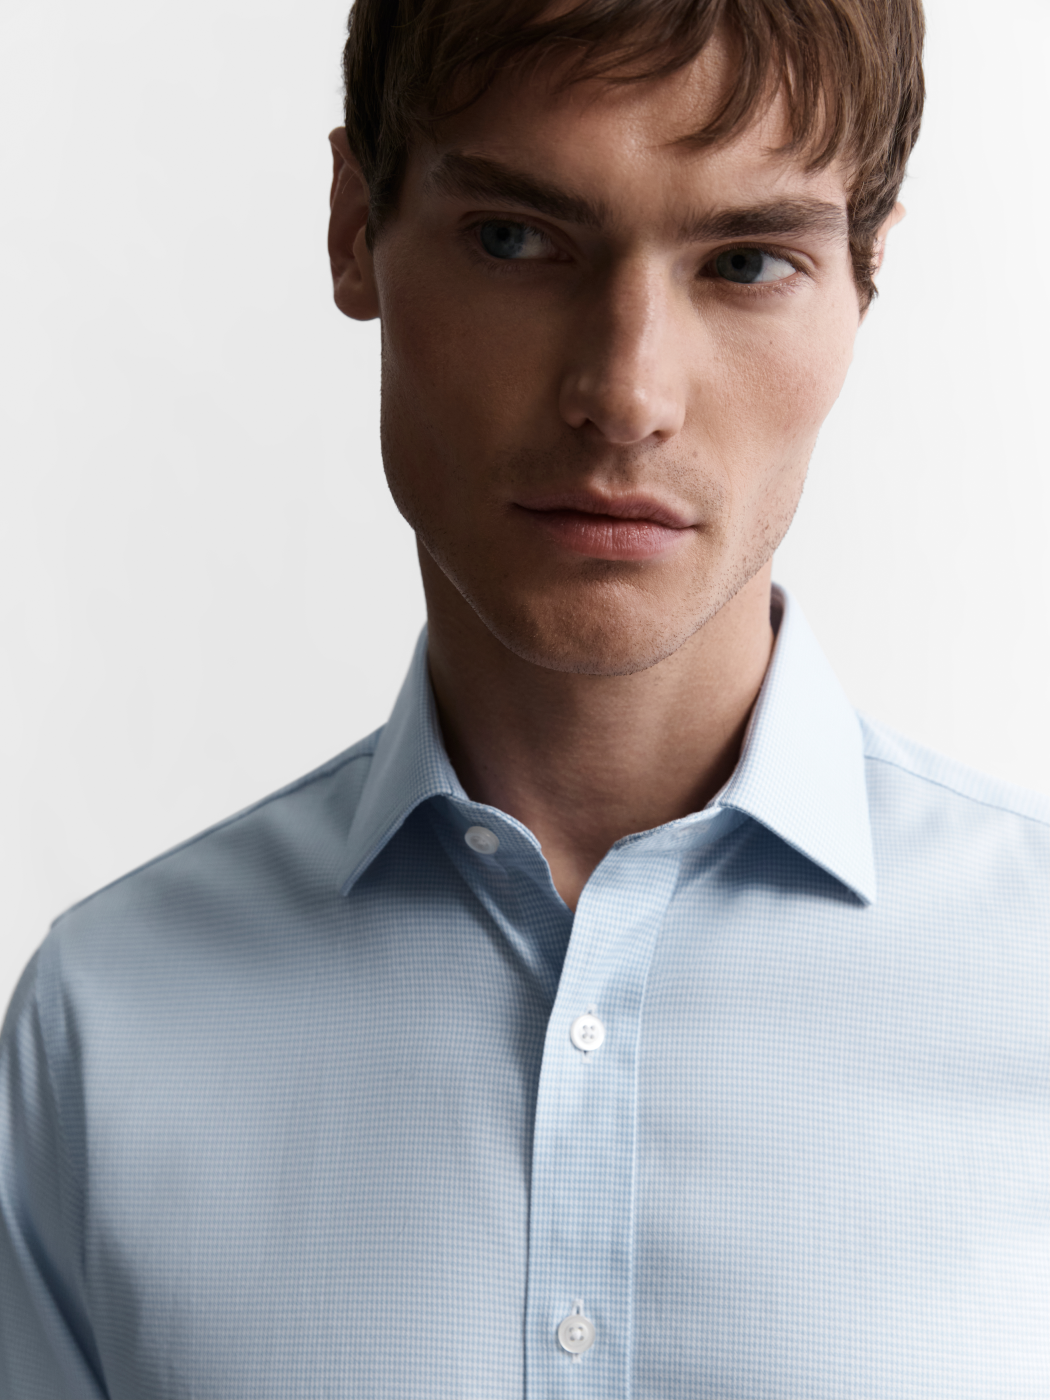 Image 2 of Non-Iron Light Blue Mini Dogtooth Plain Weave Super Fitted Dual Cuff Classic Collar Shirt